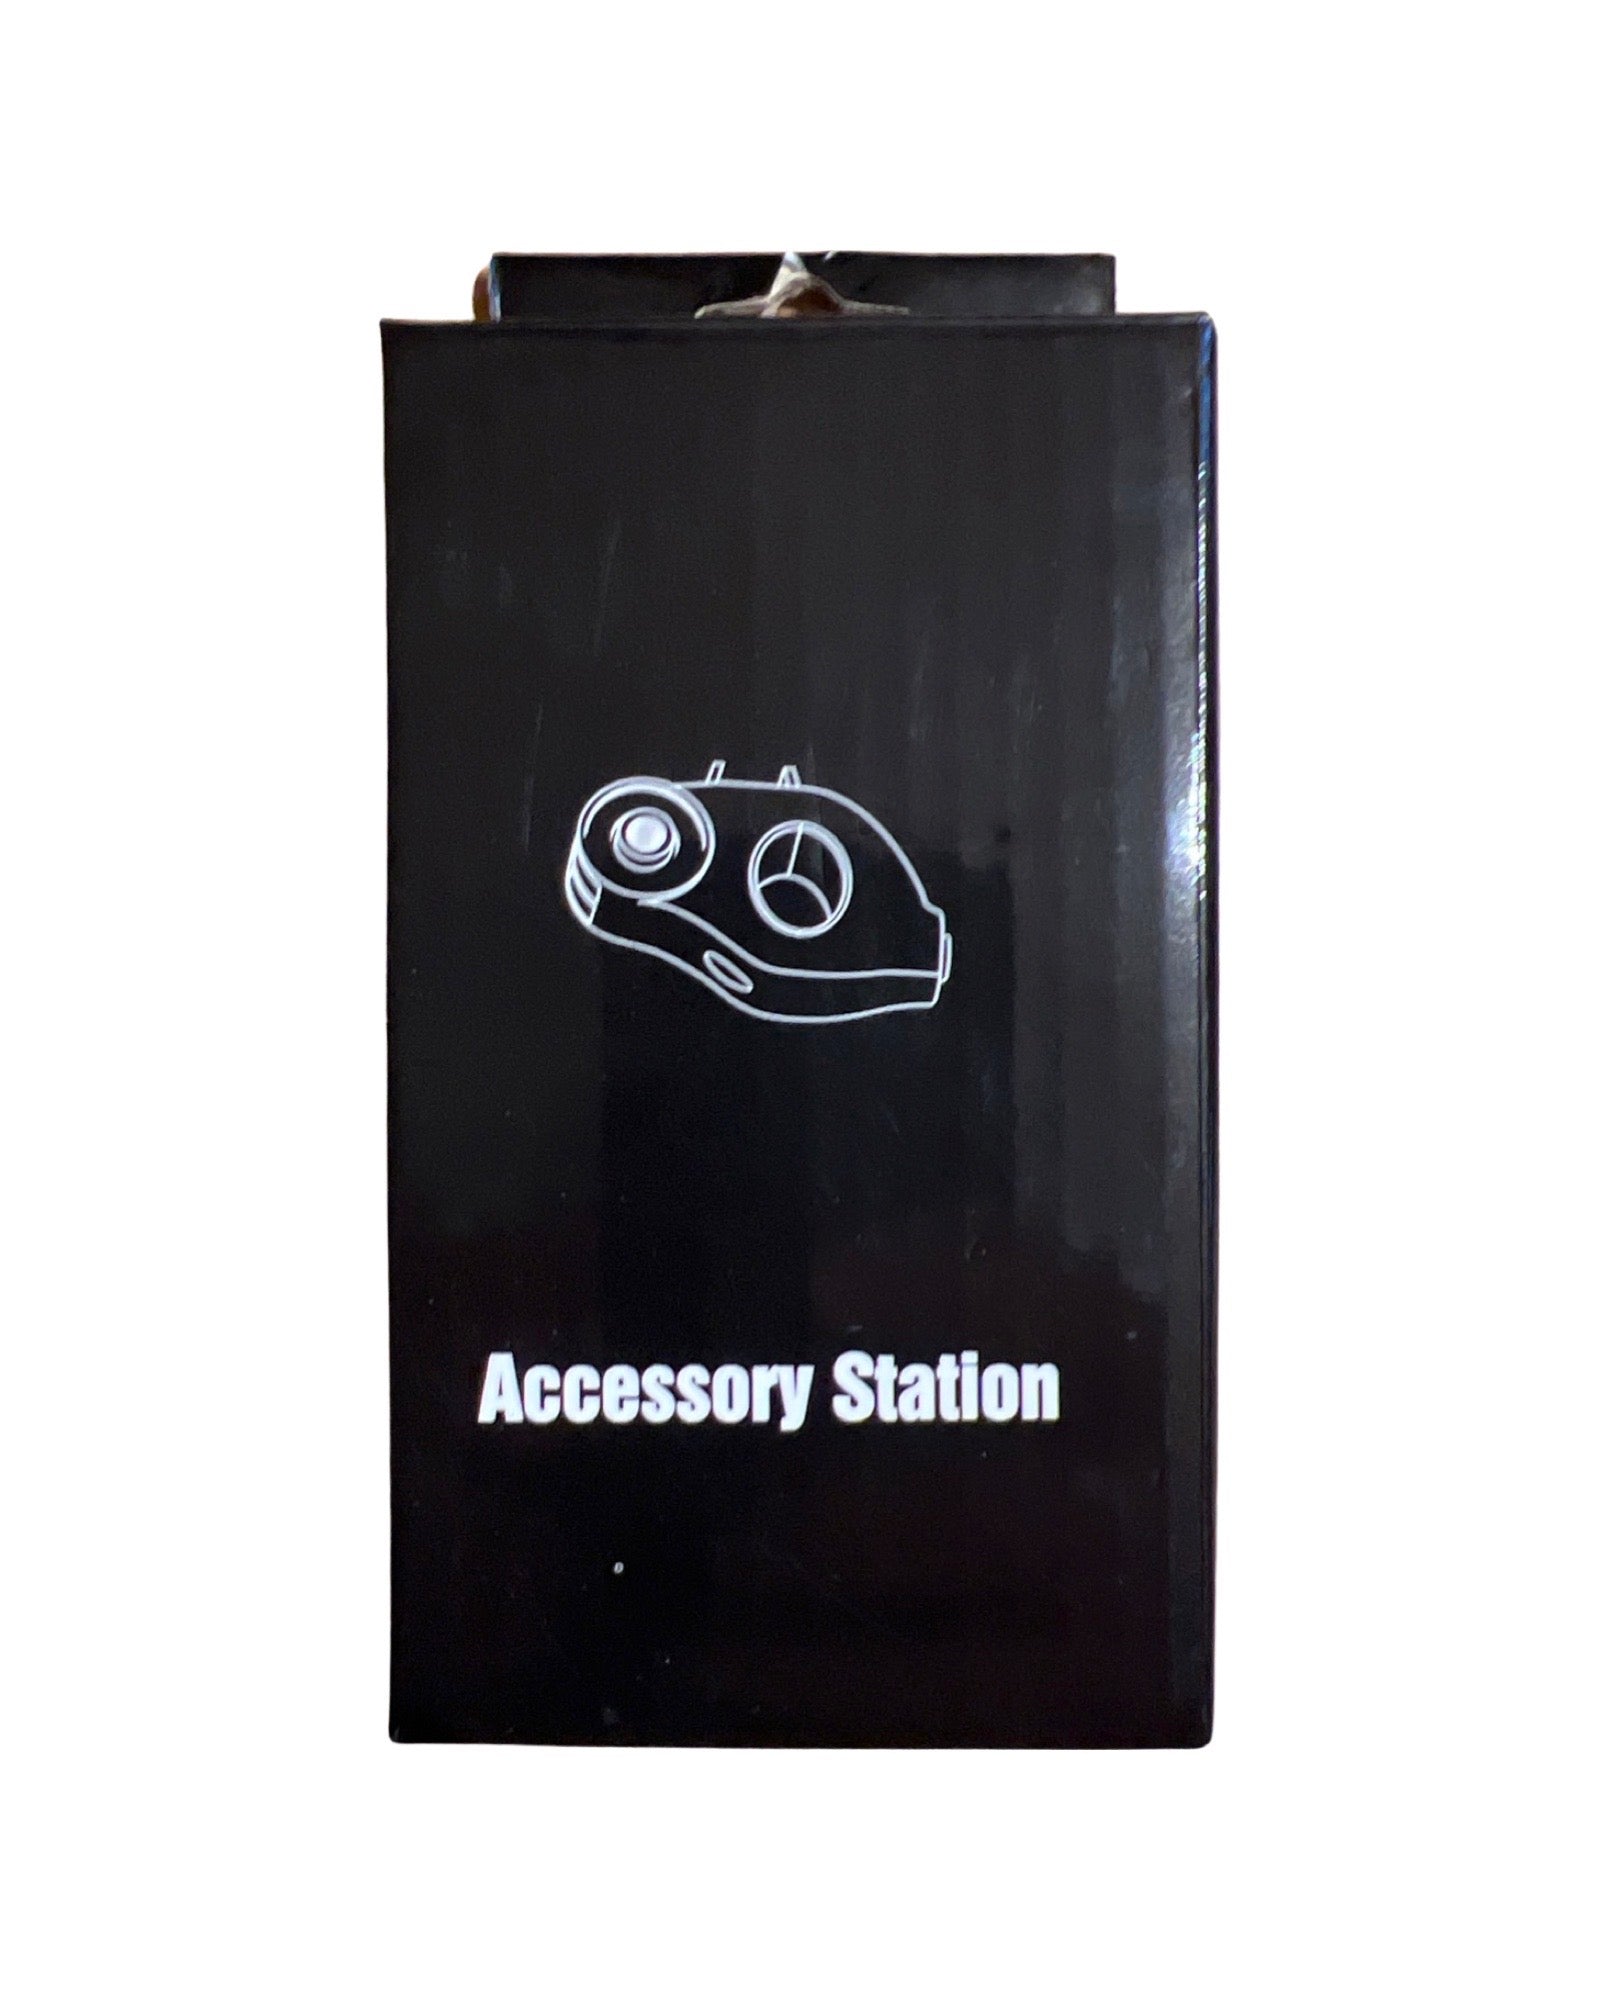 Accessory Station for GT series carts